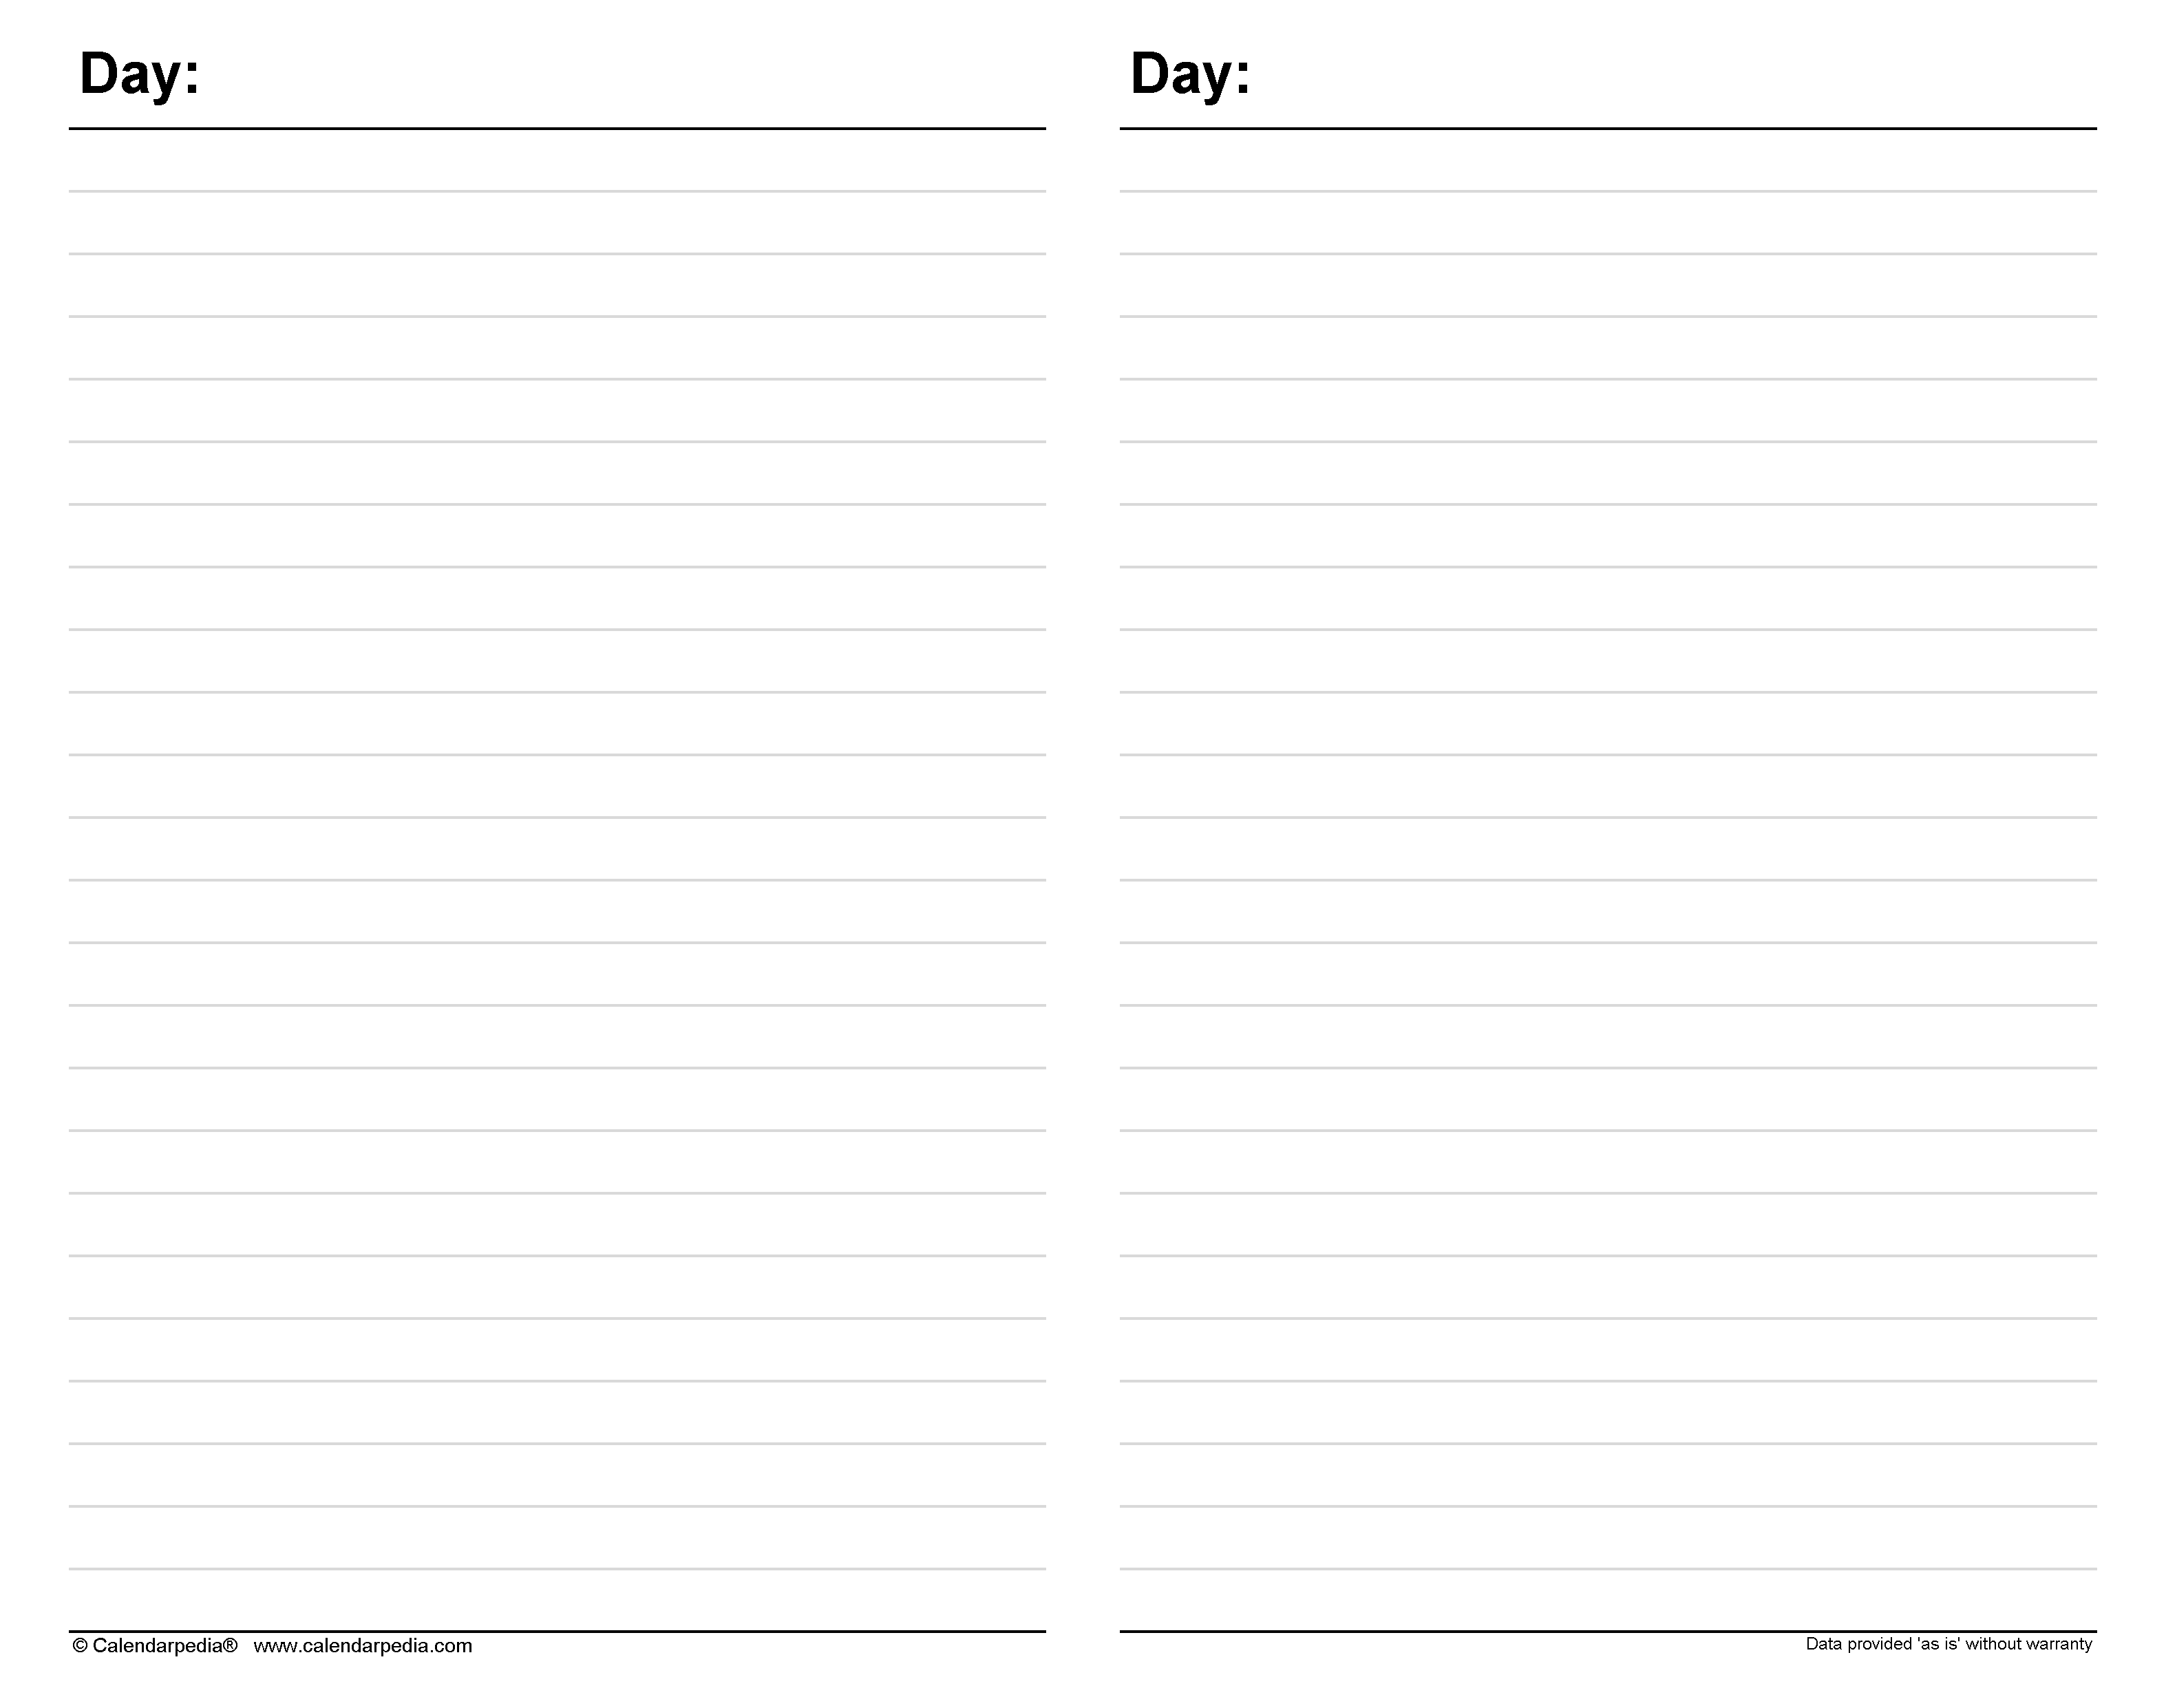 Daily Planners In Microsoft Word Format 20 Templates